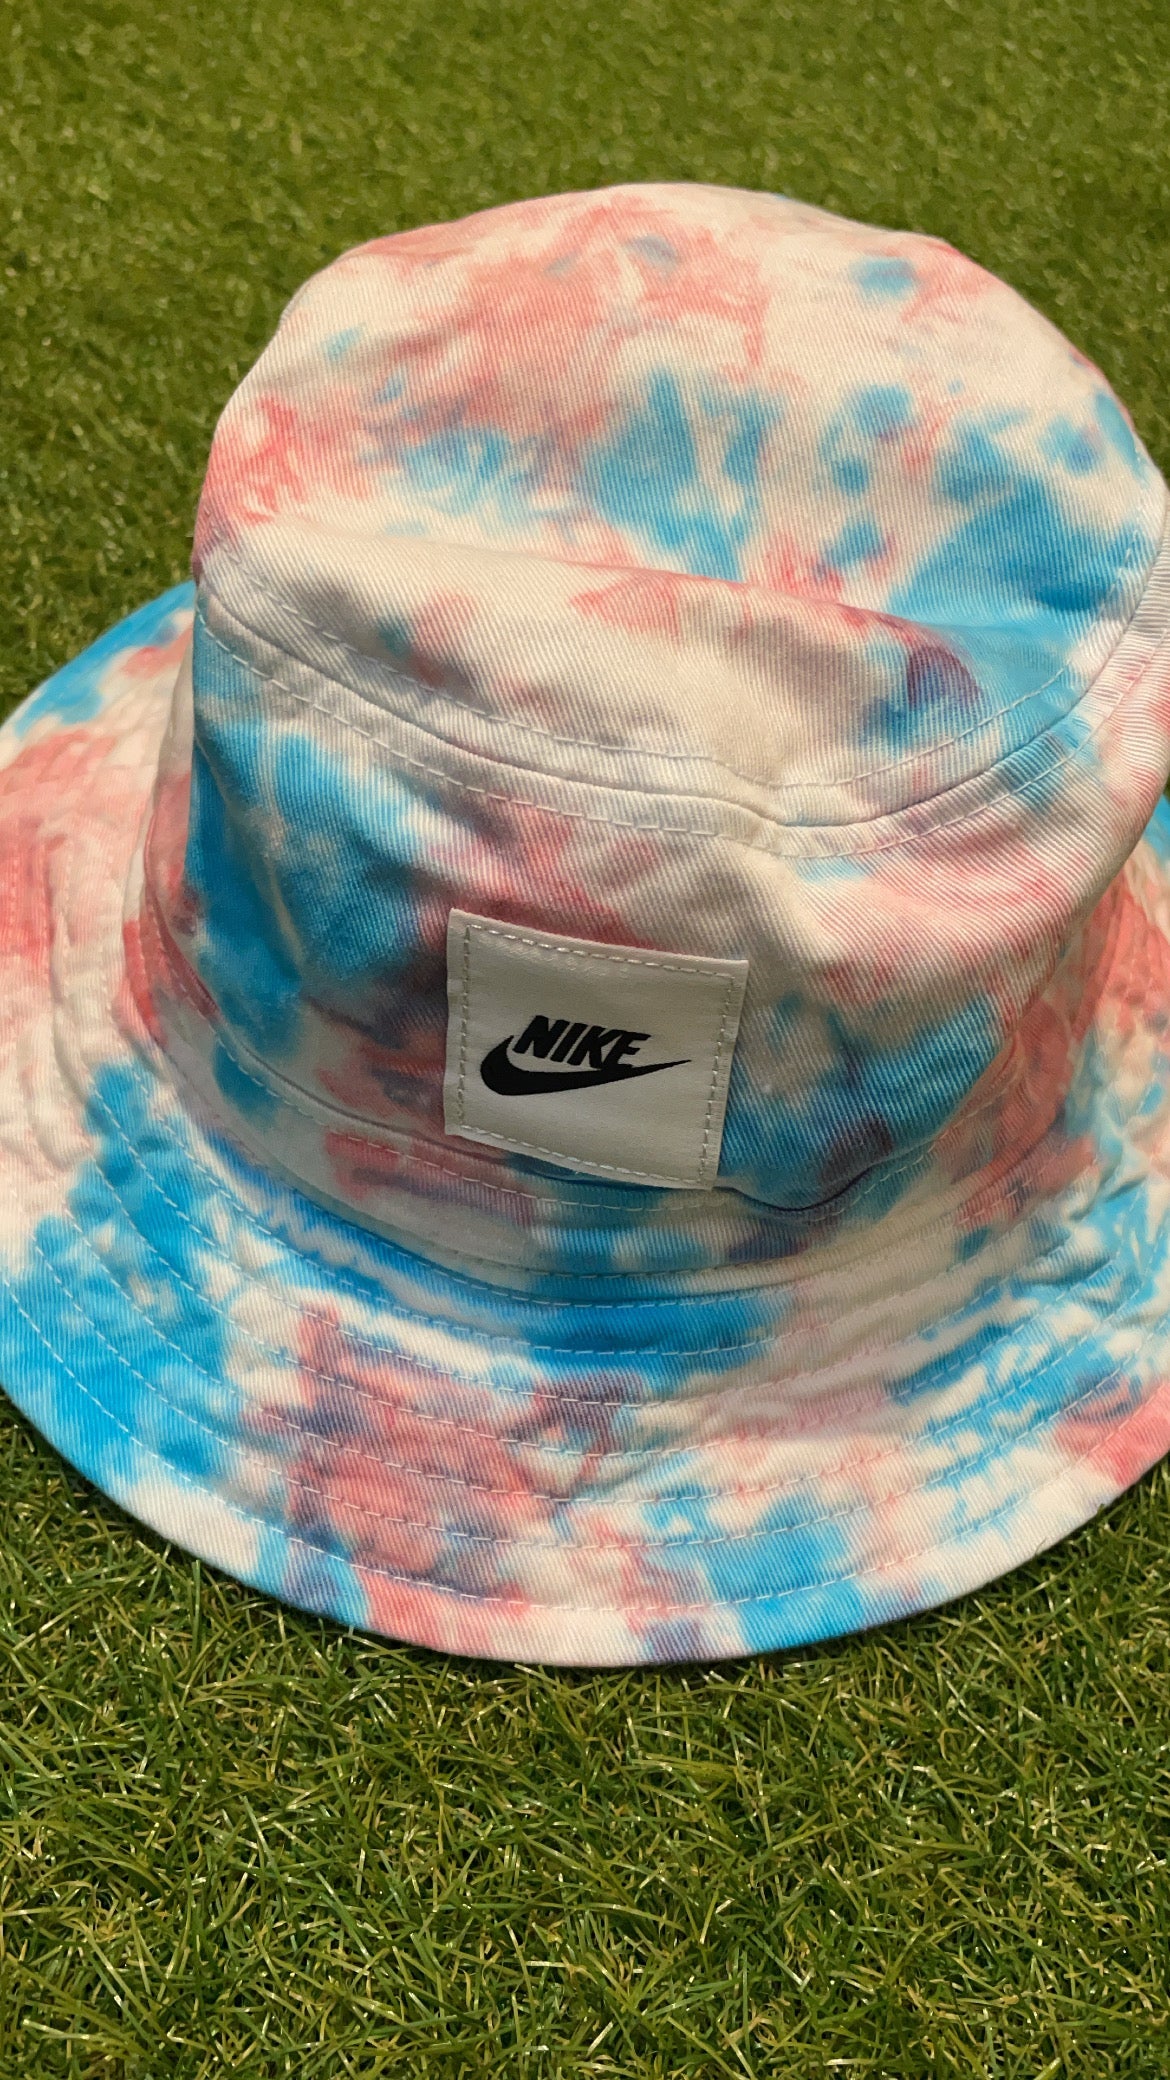 Matching Colour NIKE Bucket Hat - SAVE 20%